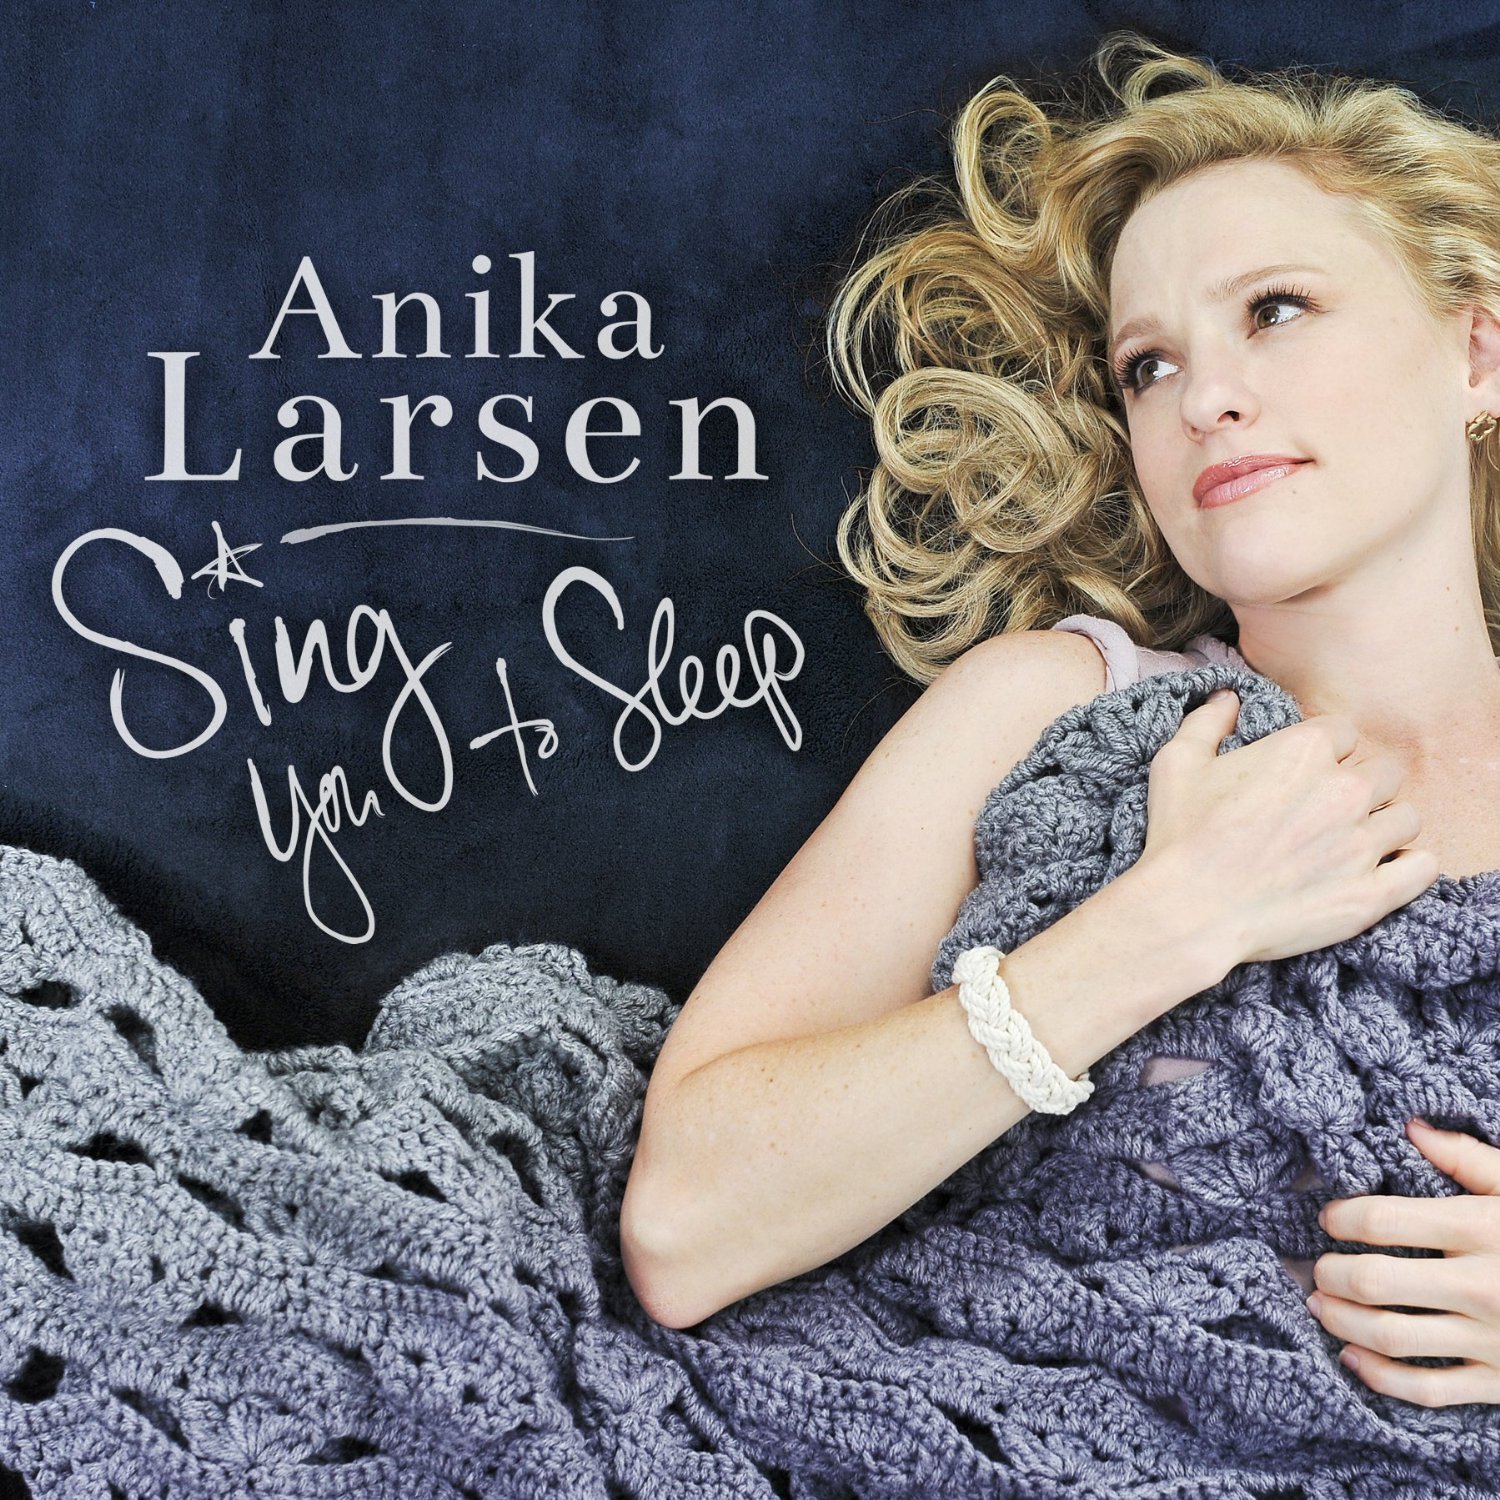 THE DEBUT SOLO ALBUM FROM TONY AWARD NOMINEE ANIKA LARSEN “SING YOU TO SLEEP” /CD ONLINE AND IN STORES DECEMBER 9 1 YELLOW SOUND LABEL will release Sing you to Sleep, the debut solo CD of dreamy ballads and standards from ANIKA LARSEN, currently starring on Broadway in Beautiful – The Carole King Musical. For her role as legendary songwriter Cynthia Weil, Anika was nominated for a 2014 Tony Award and won the Drama Desk Award. She has also appeared in Rent, All Shook Up, Xanadu and Avenue Q.Sing you to Sleep – produced by Emmy Award-winner and Grammy Award-nominee Michael Croiter (Matilda, Big Fish, Heathers), with Dan Watt serving as executive producer – will be available online and in stores December 9. Pre-order the album at Amazon.com or www.yellowsoundlabel.com. 